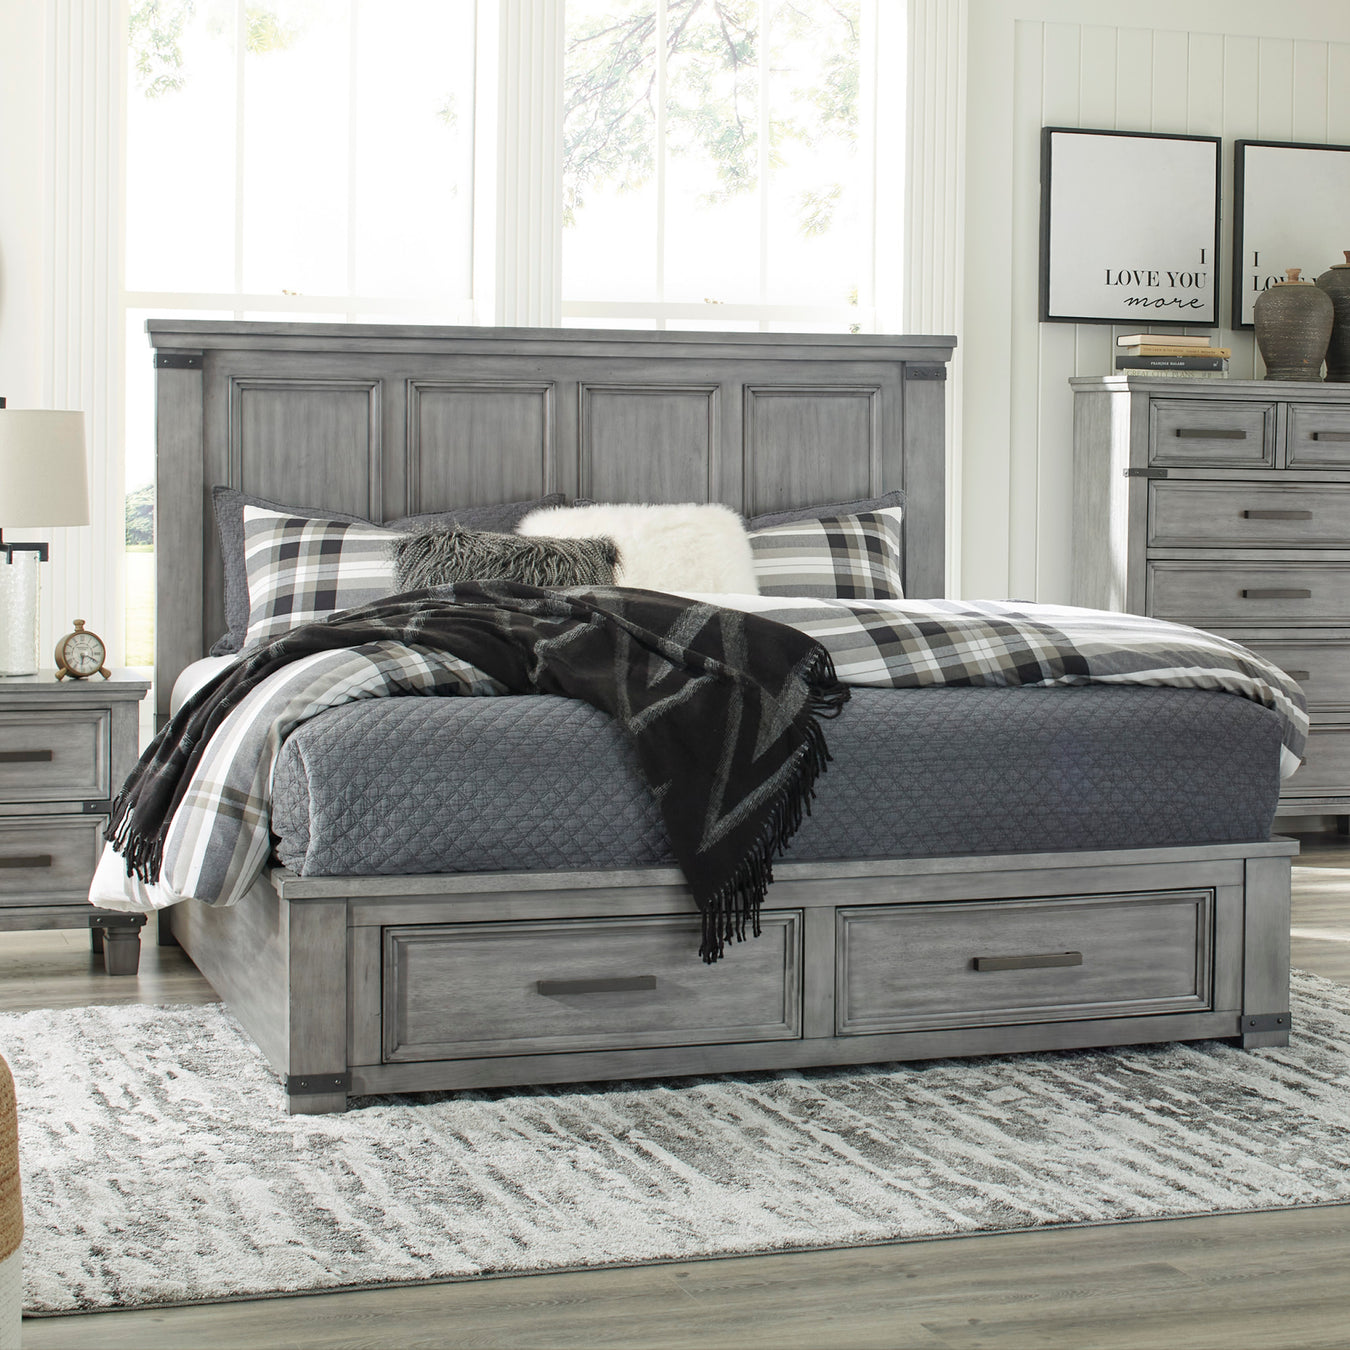 Shop Beds at JR Furniture Store in Fayetteville, NC 28311